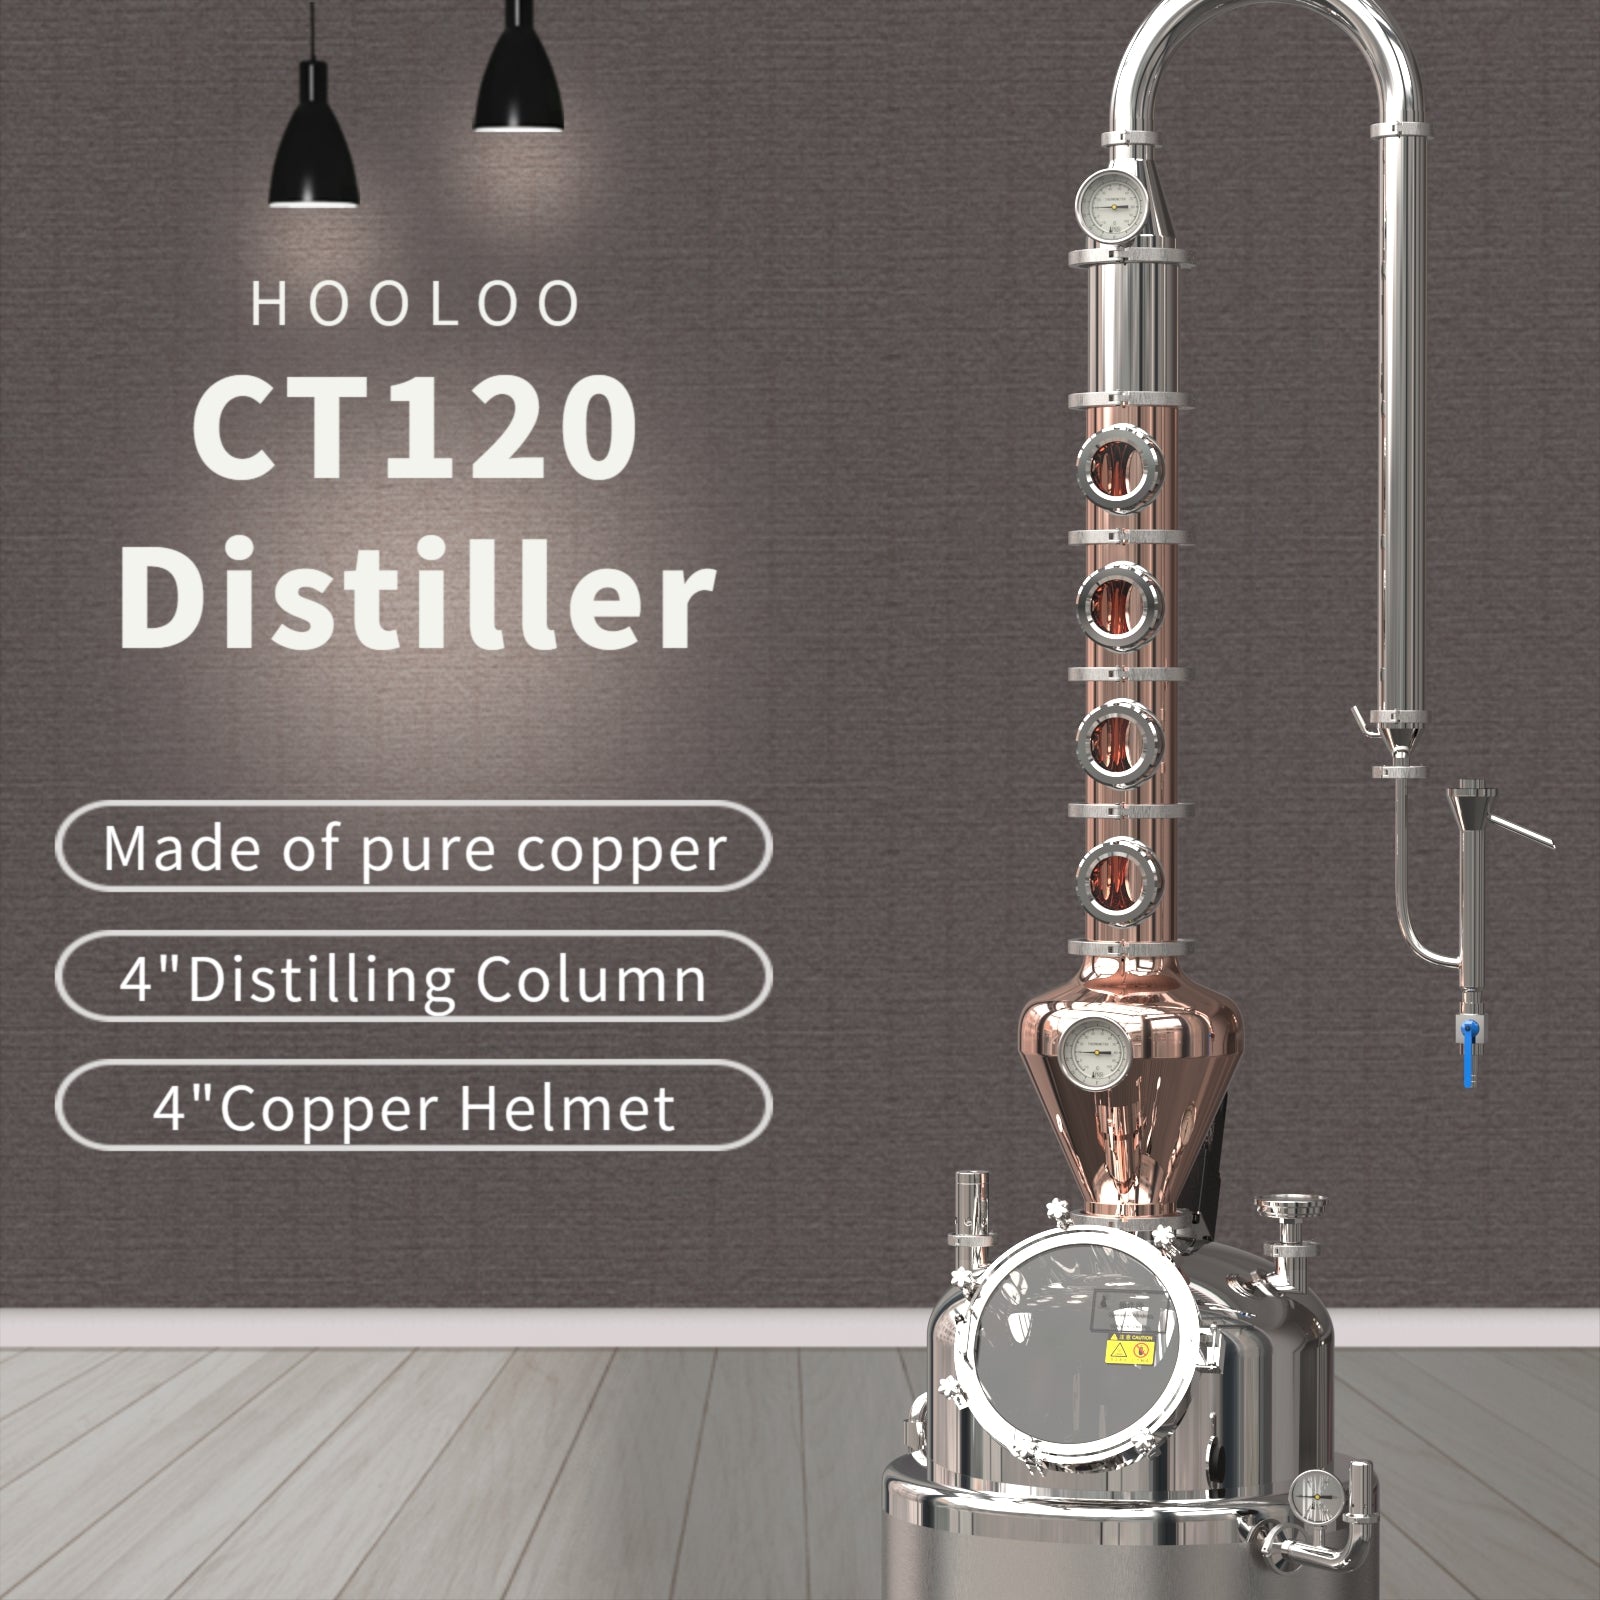 CT120 Water Bath Jacketed Distiller（FOB price）